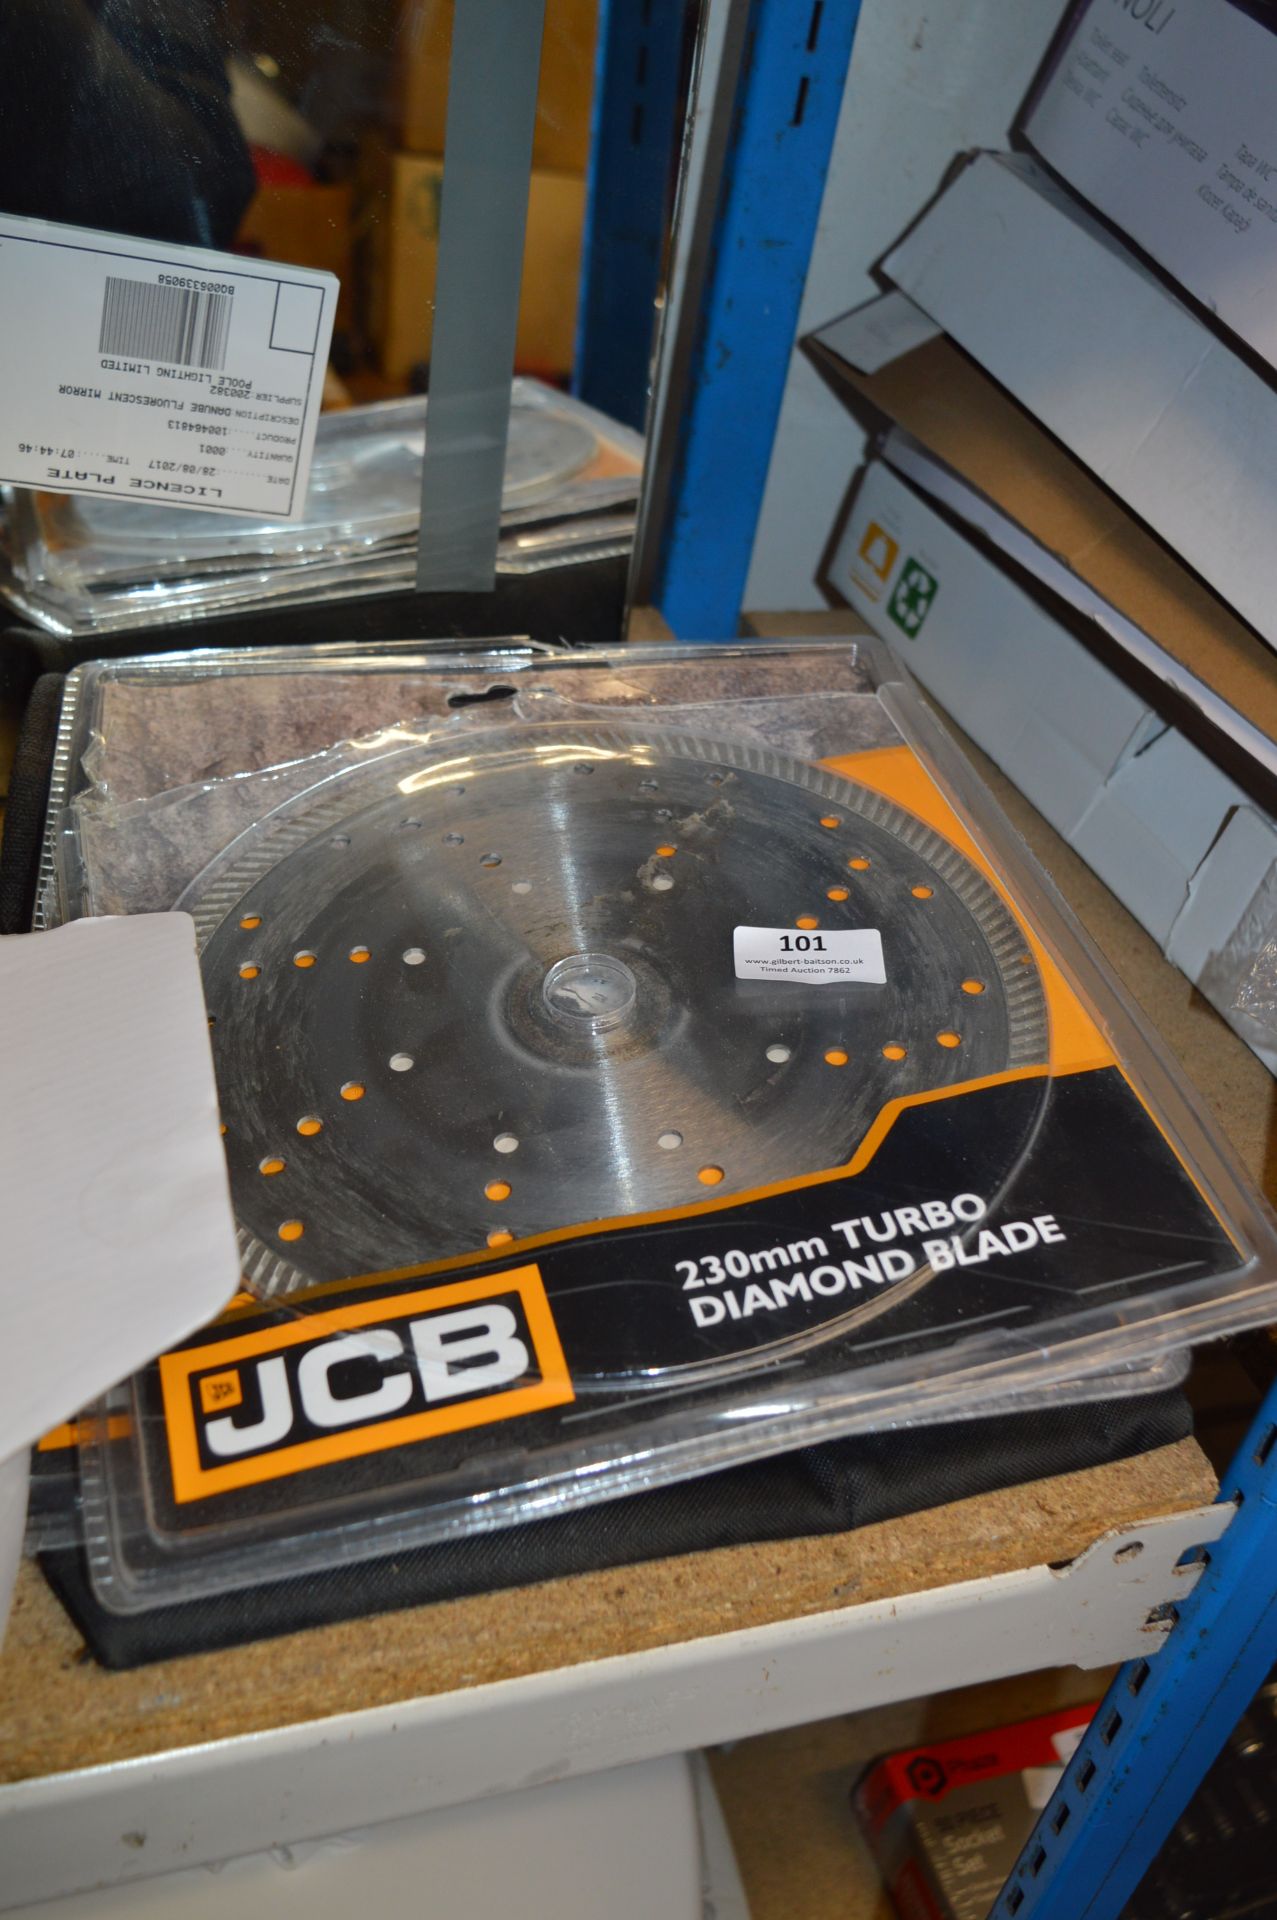 *Two JCB 230mm Turbo Diamond Blades and a Toolbelt Accessory Pouch